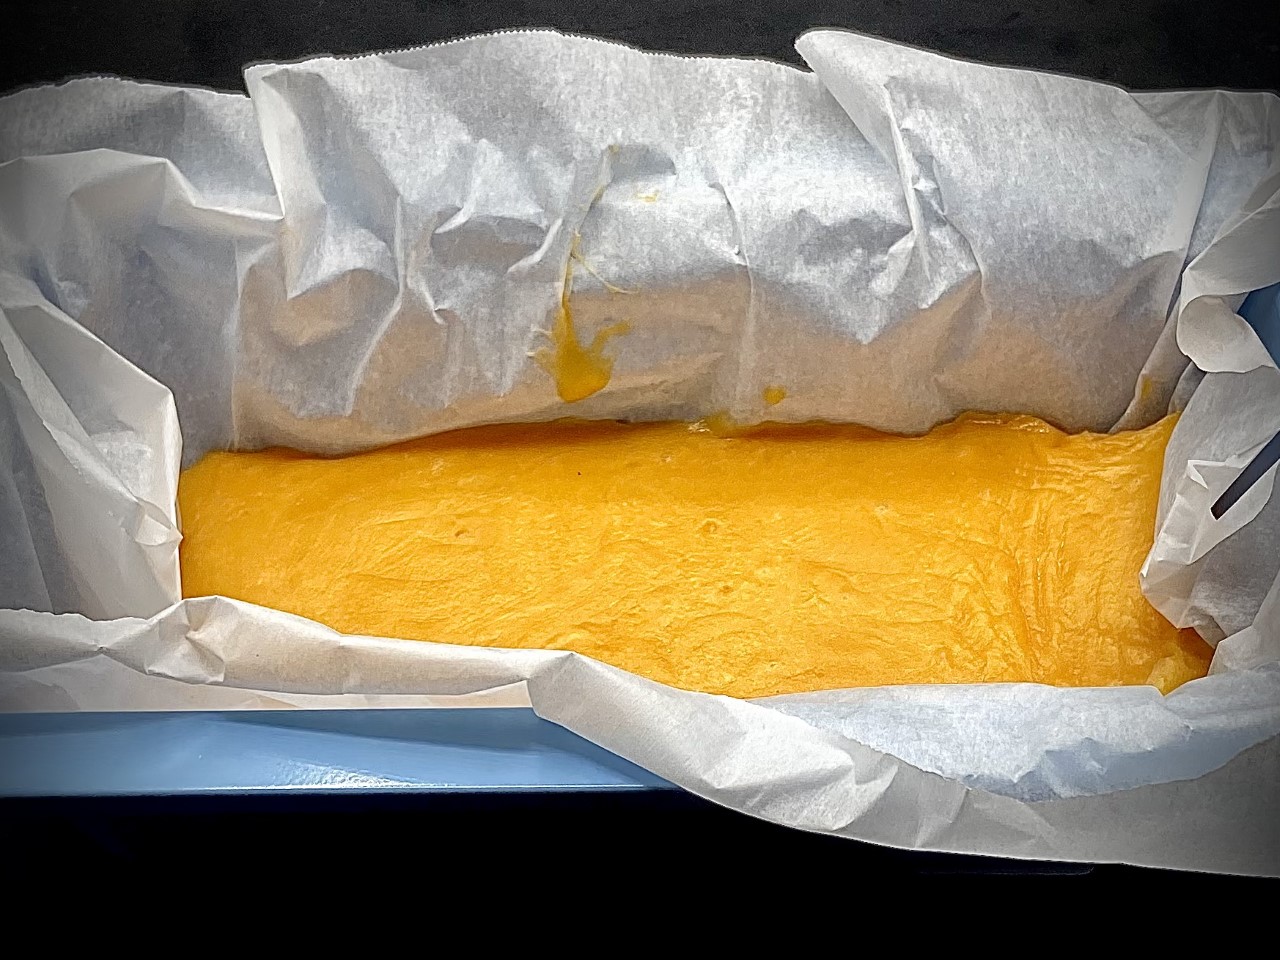 How to make healthy homemeade Velveeta cheese from scratch – with 5 ingredients!